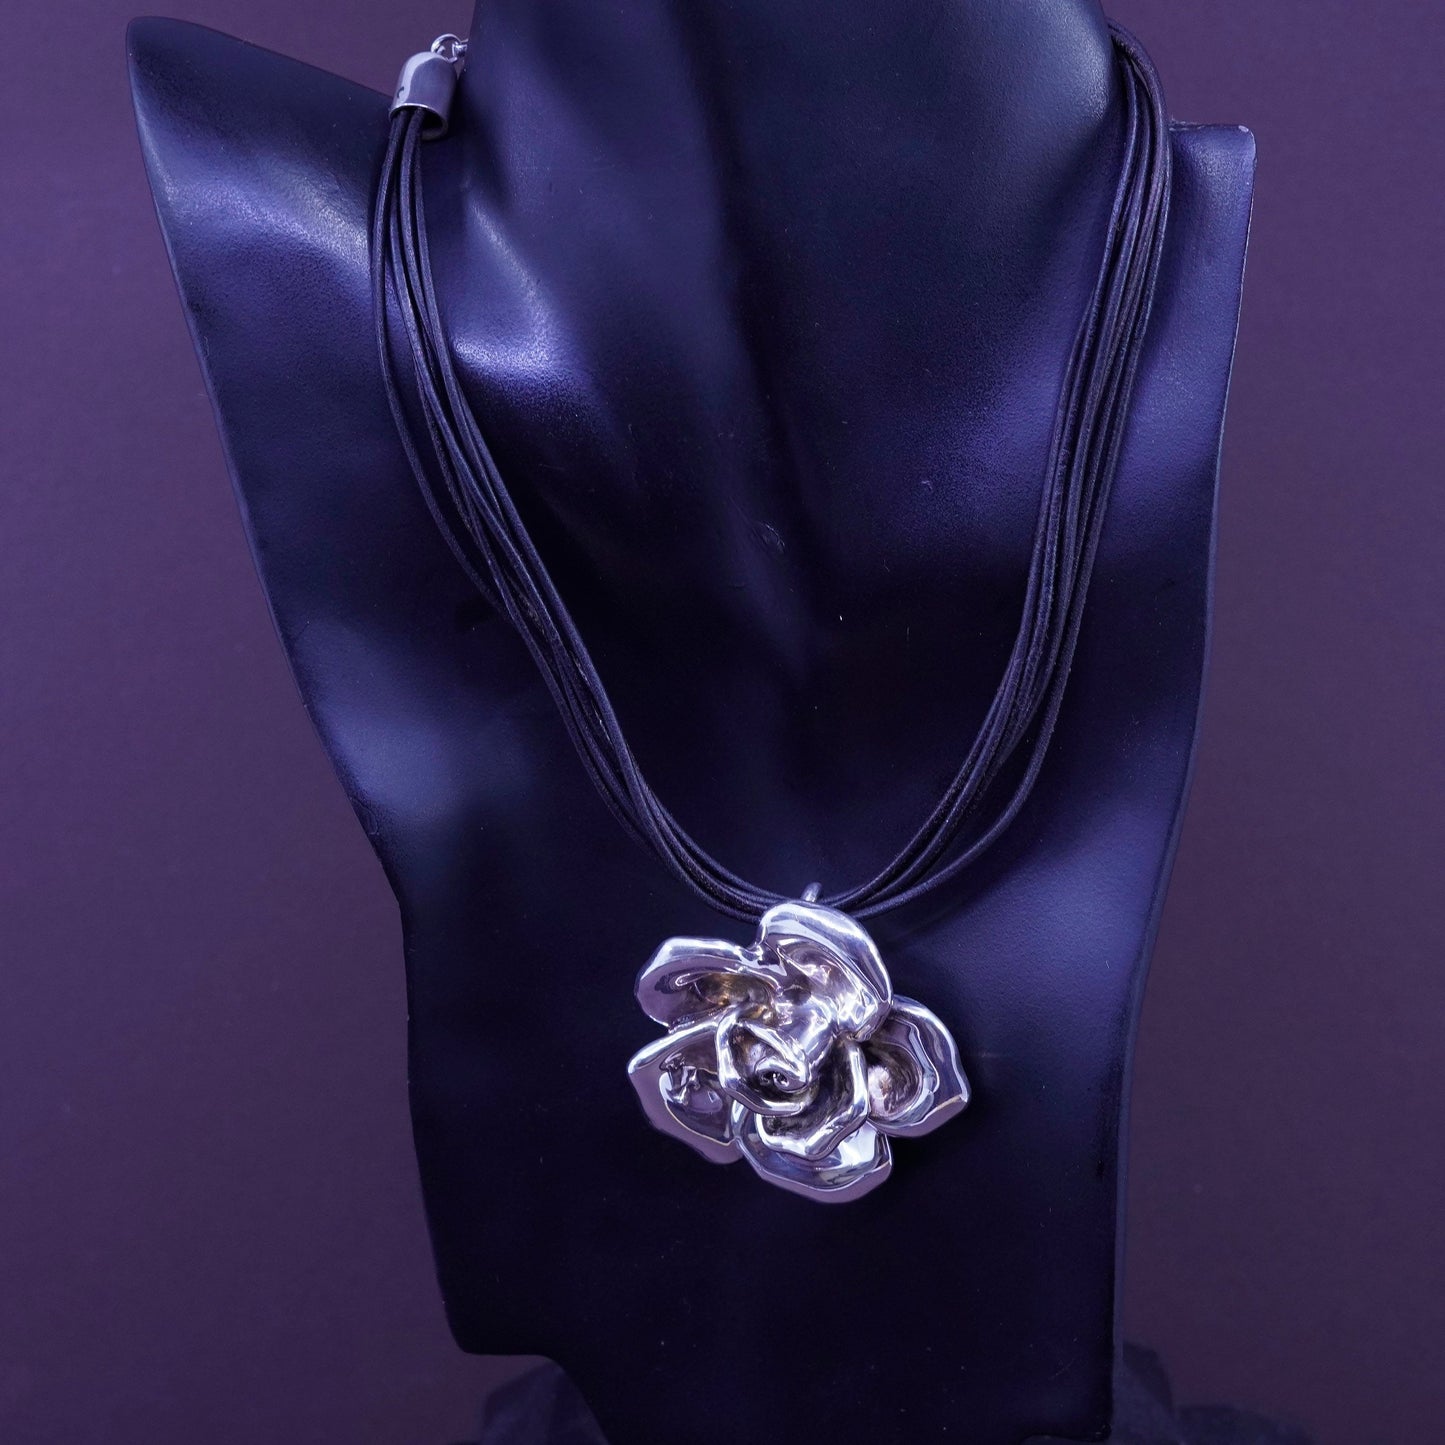 16”, handmade leather necklace with sterling 925 silver flower pendant